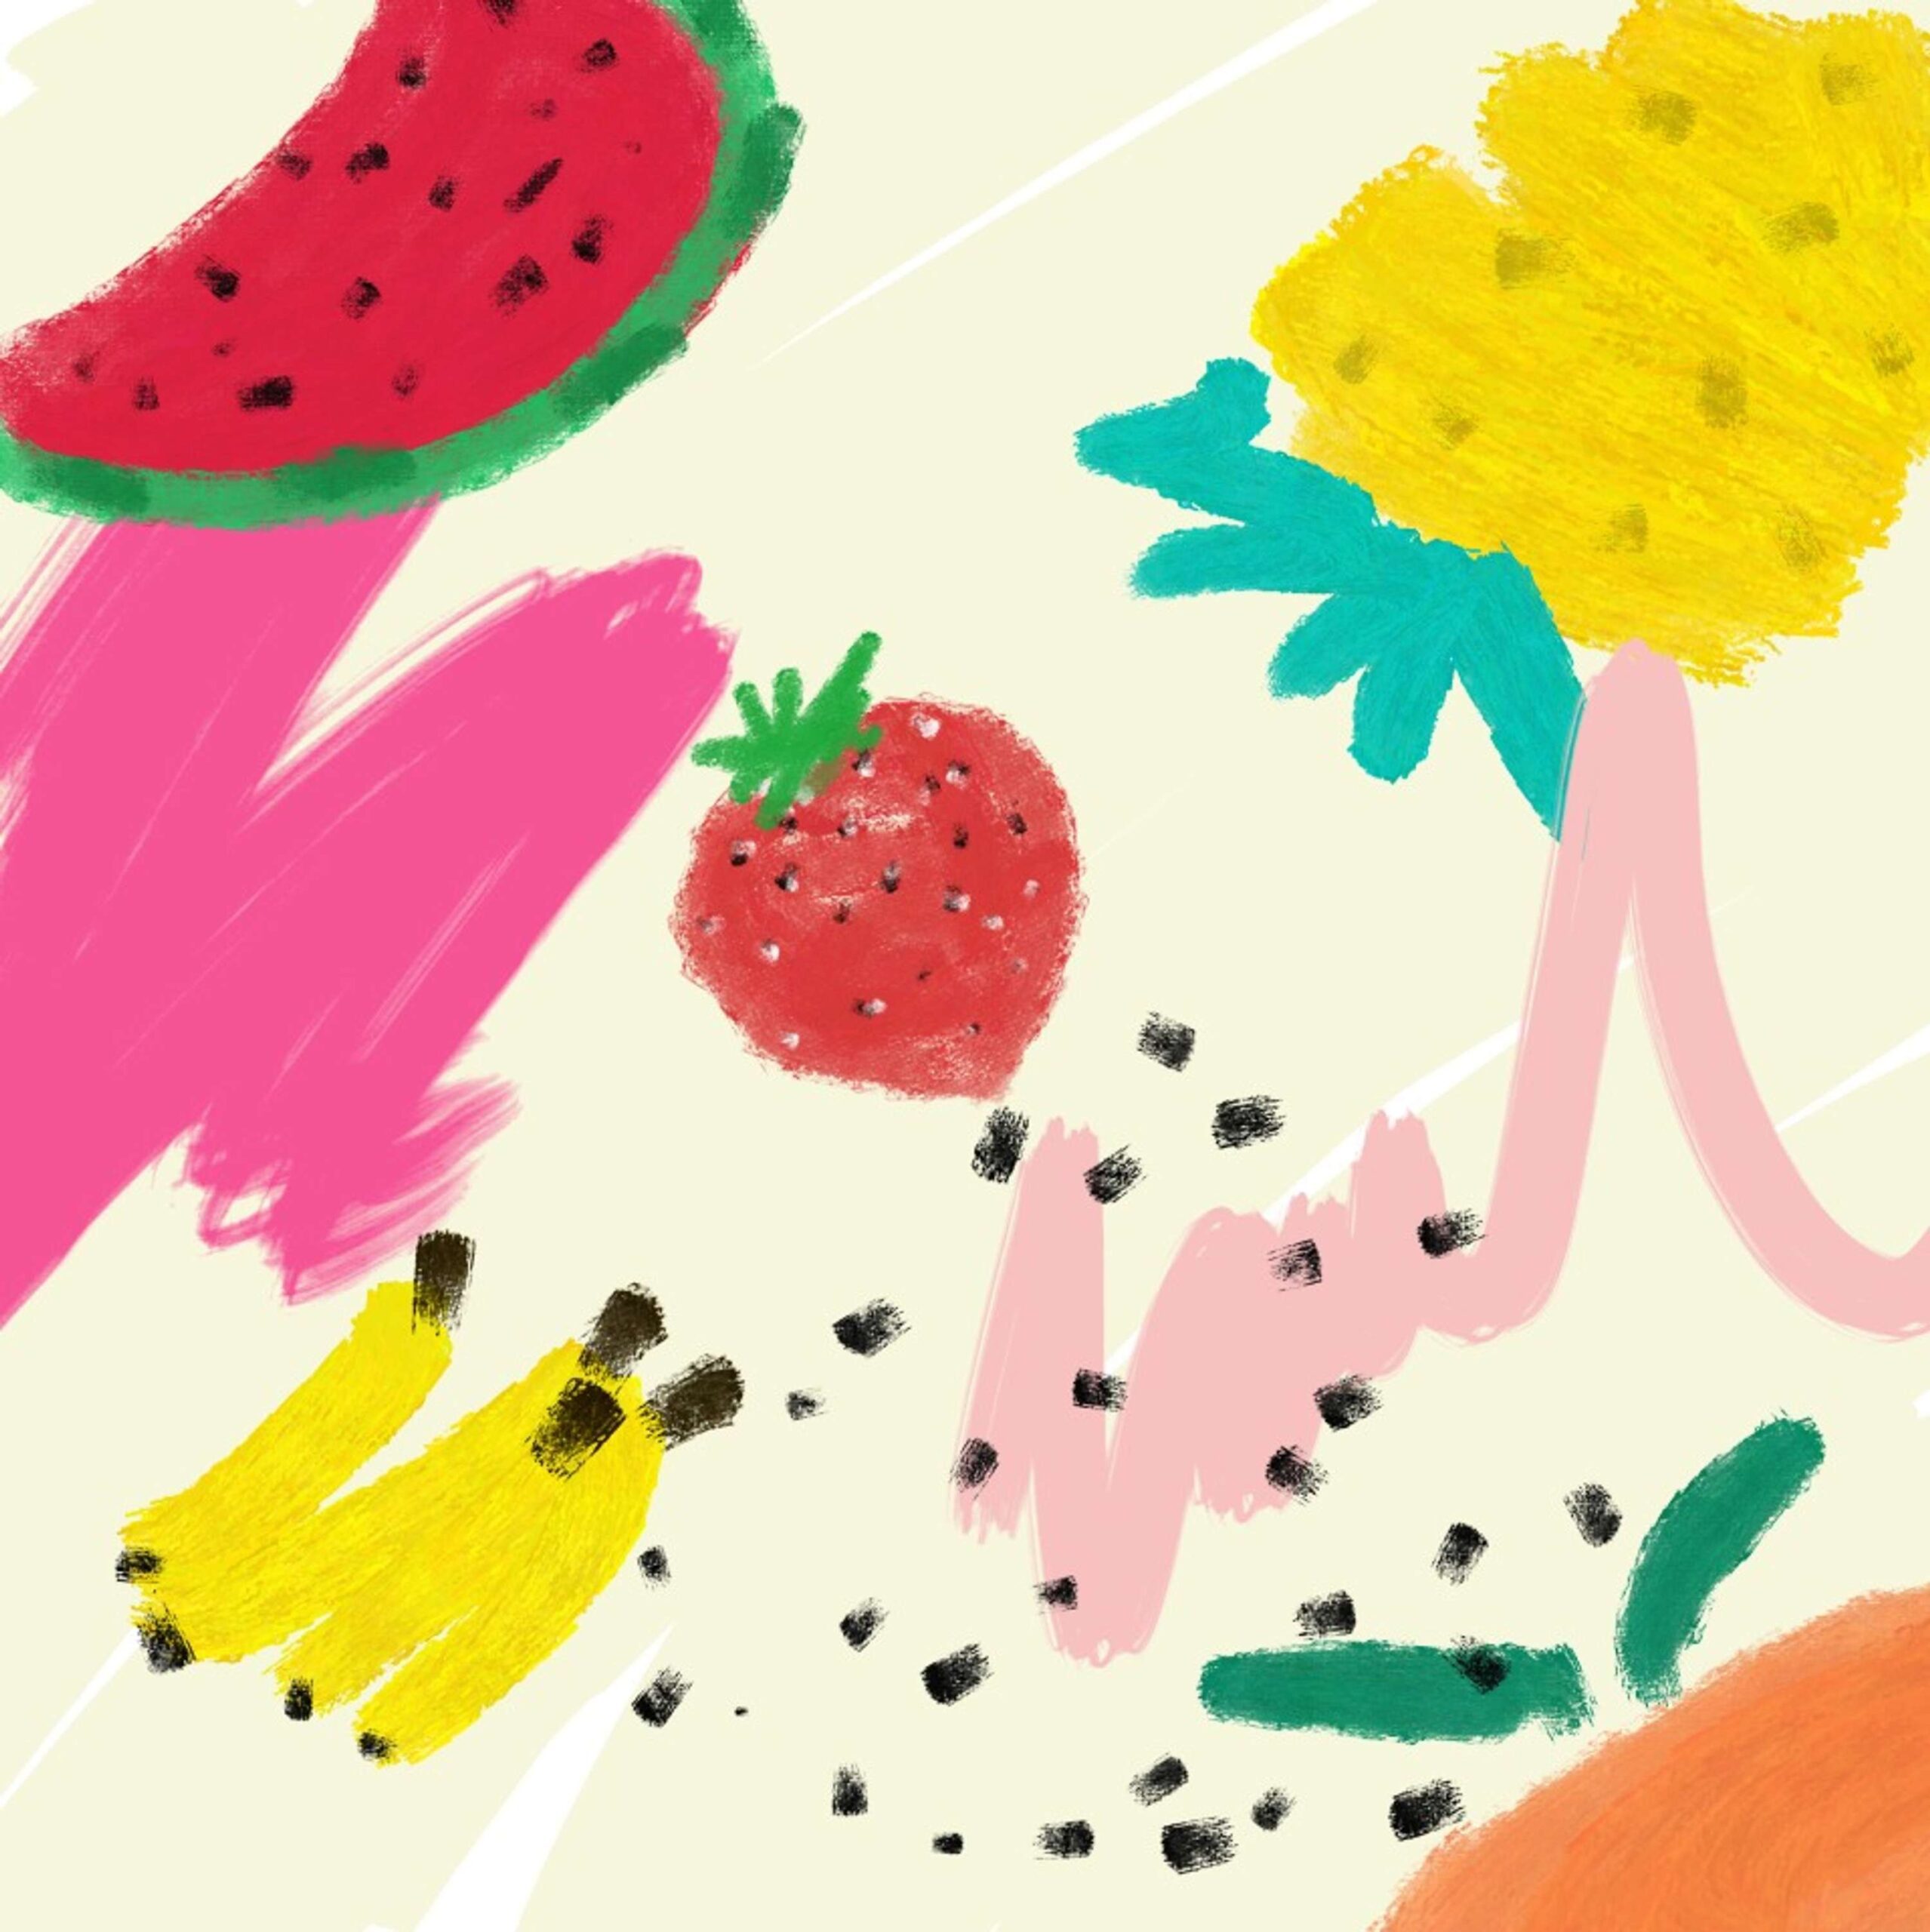 An expressive and somewhat abstract illustration of fruits including watermelon, pineapple, strawberry and bananas